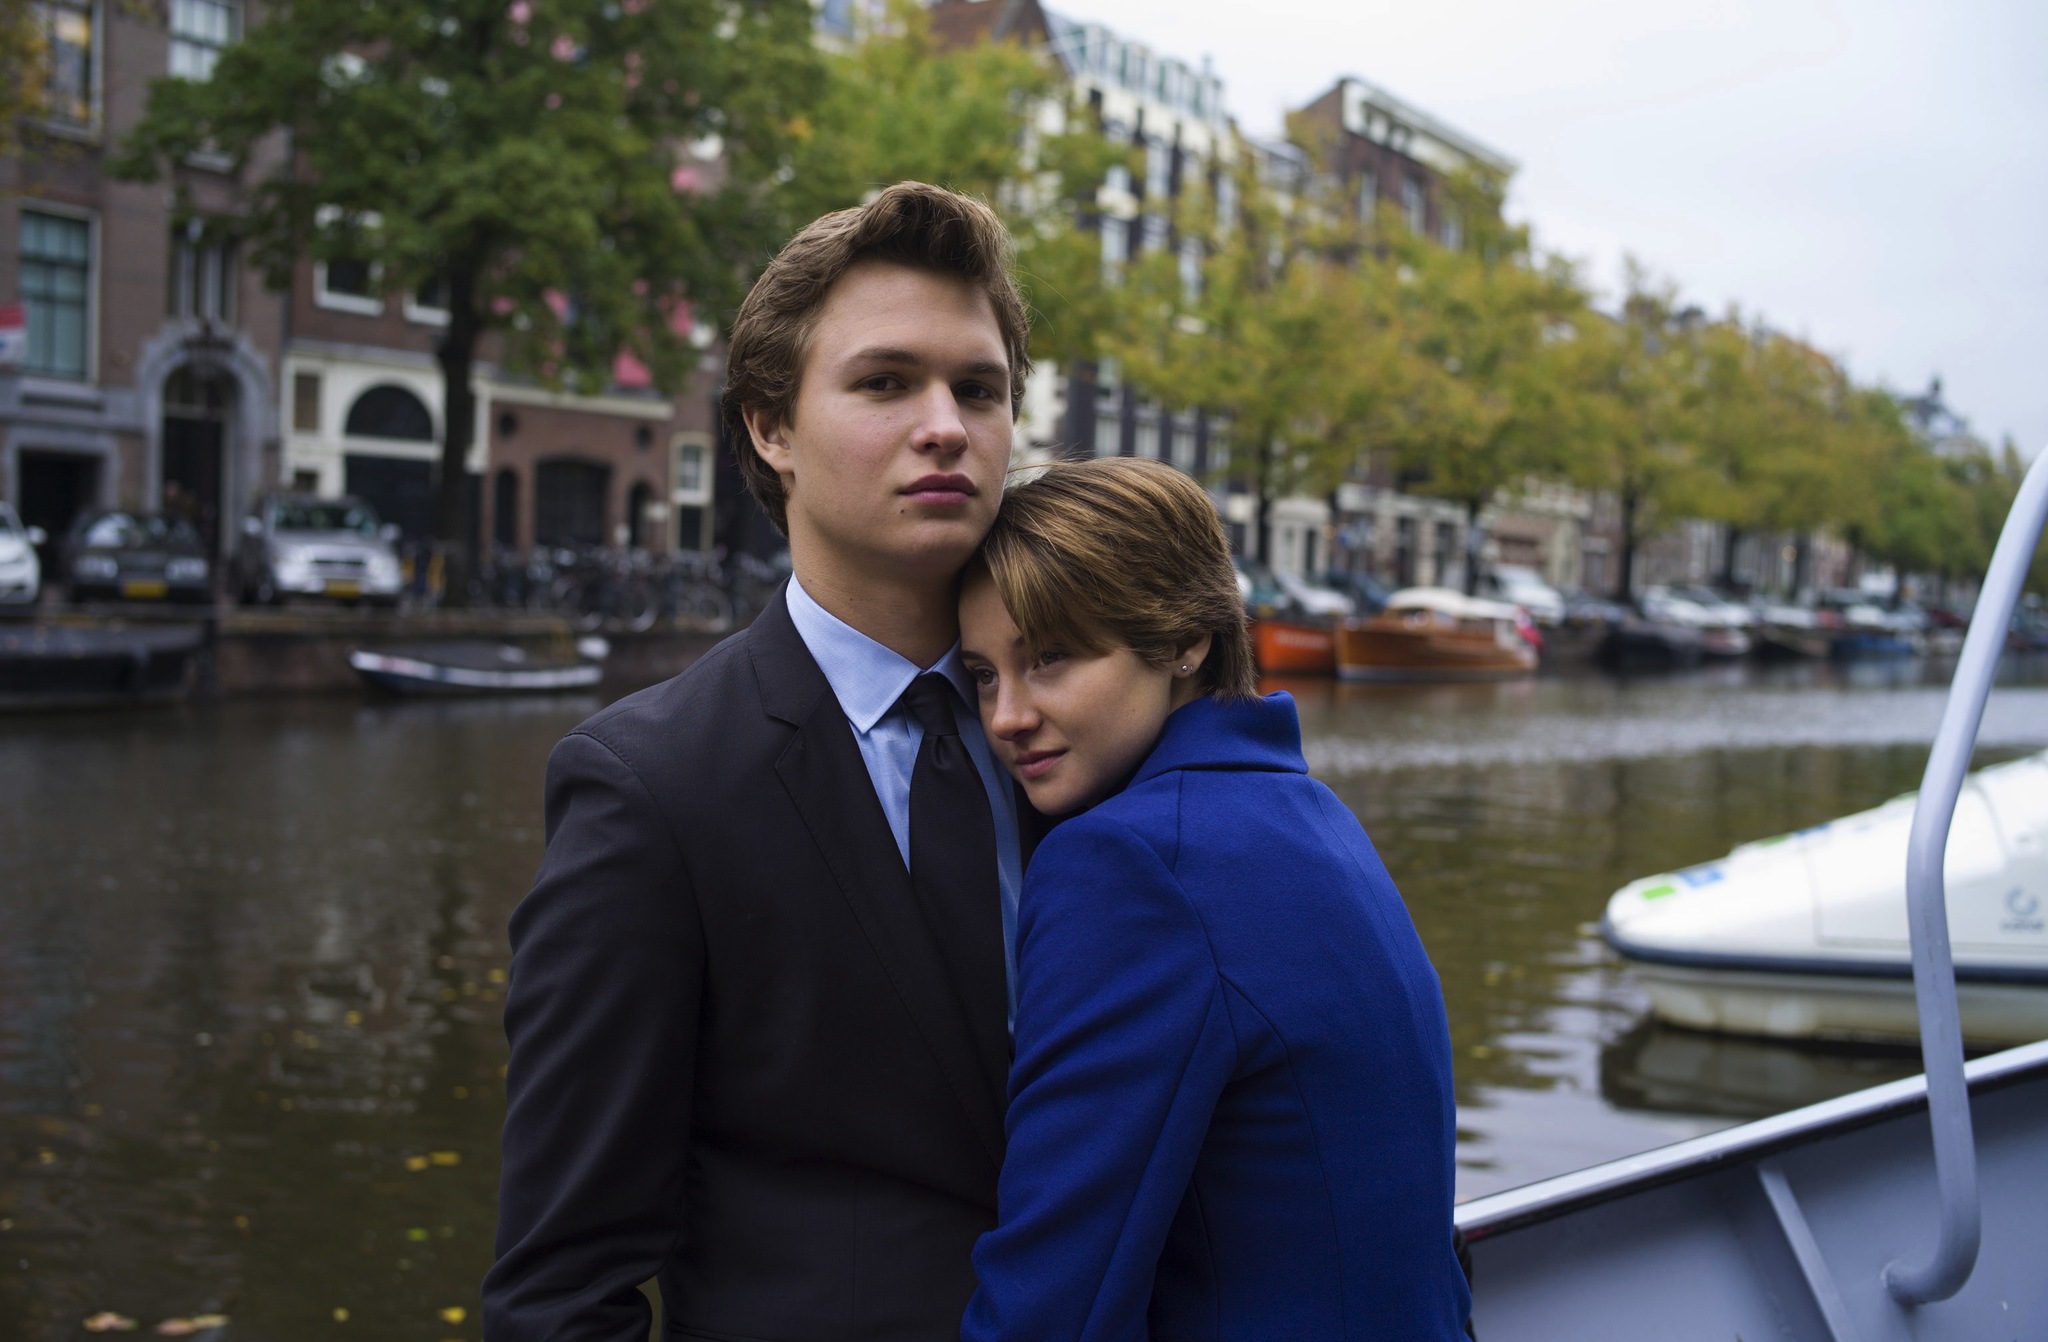 Ansel Elgort in The Fault in Our Stars